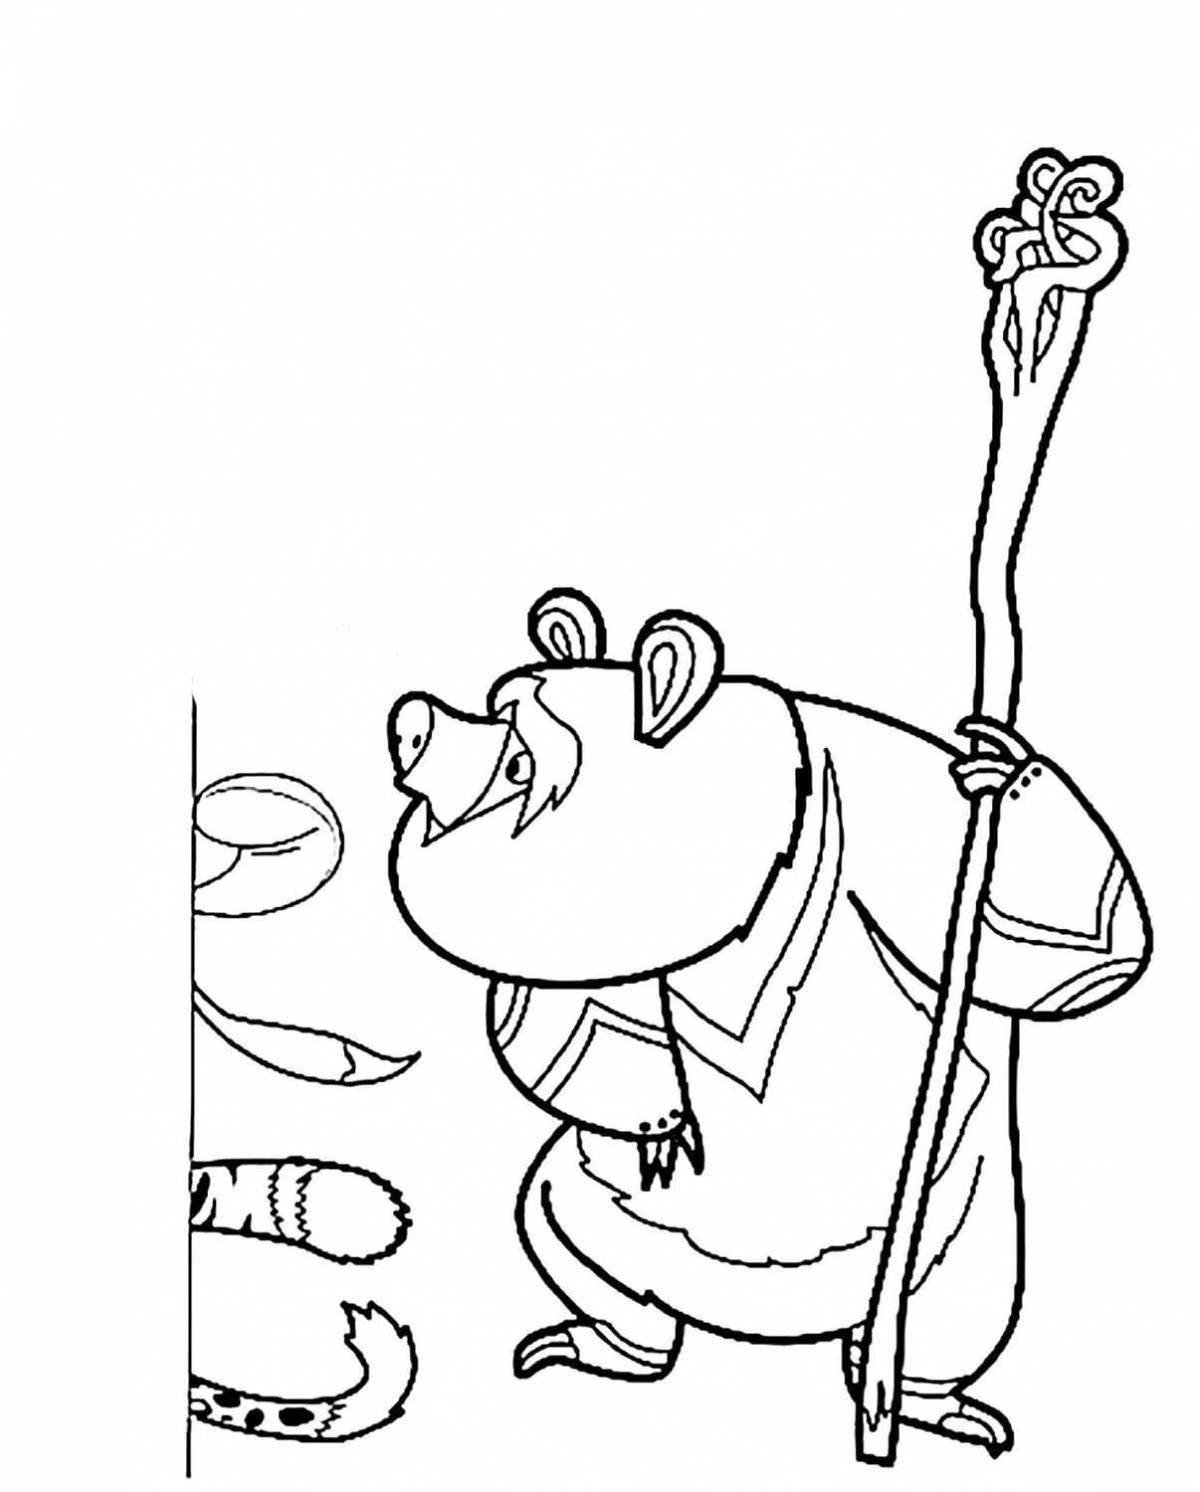 Charming leo coloring page